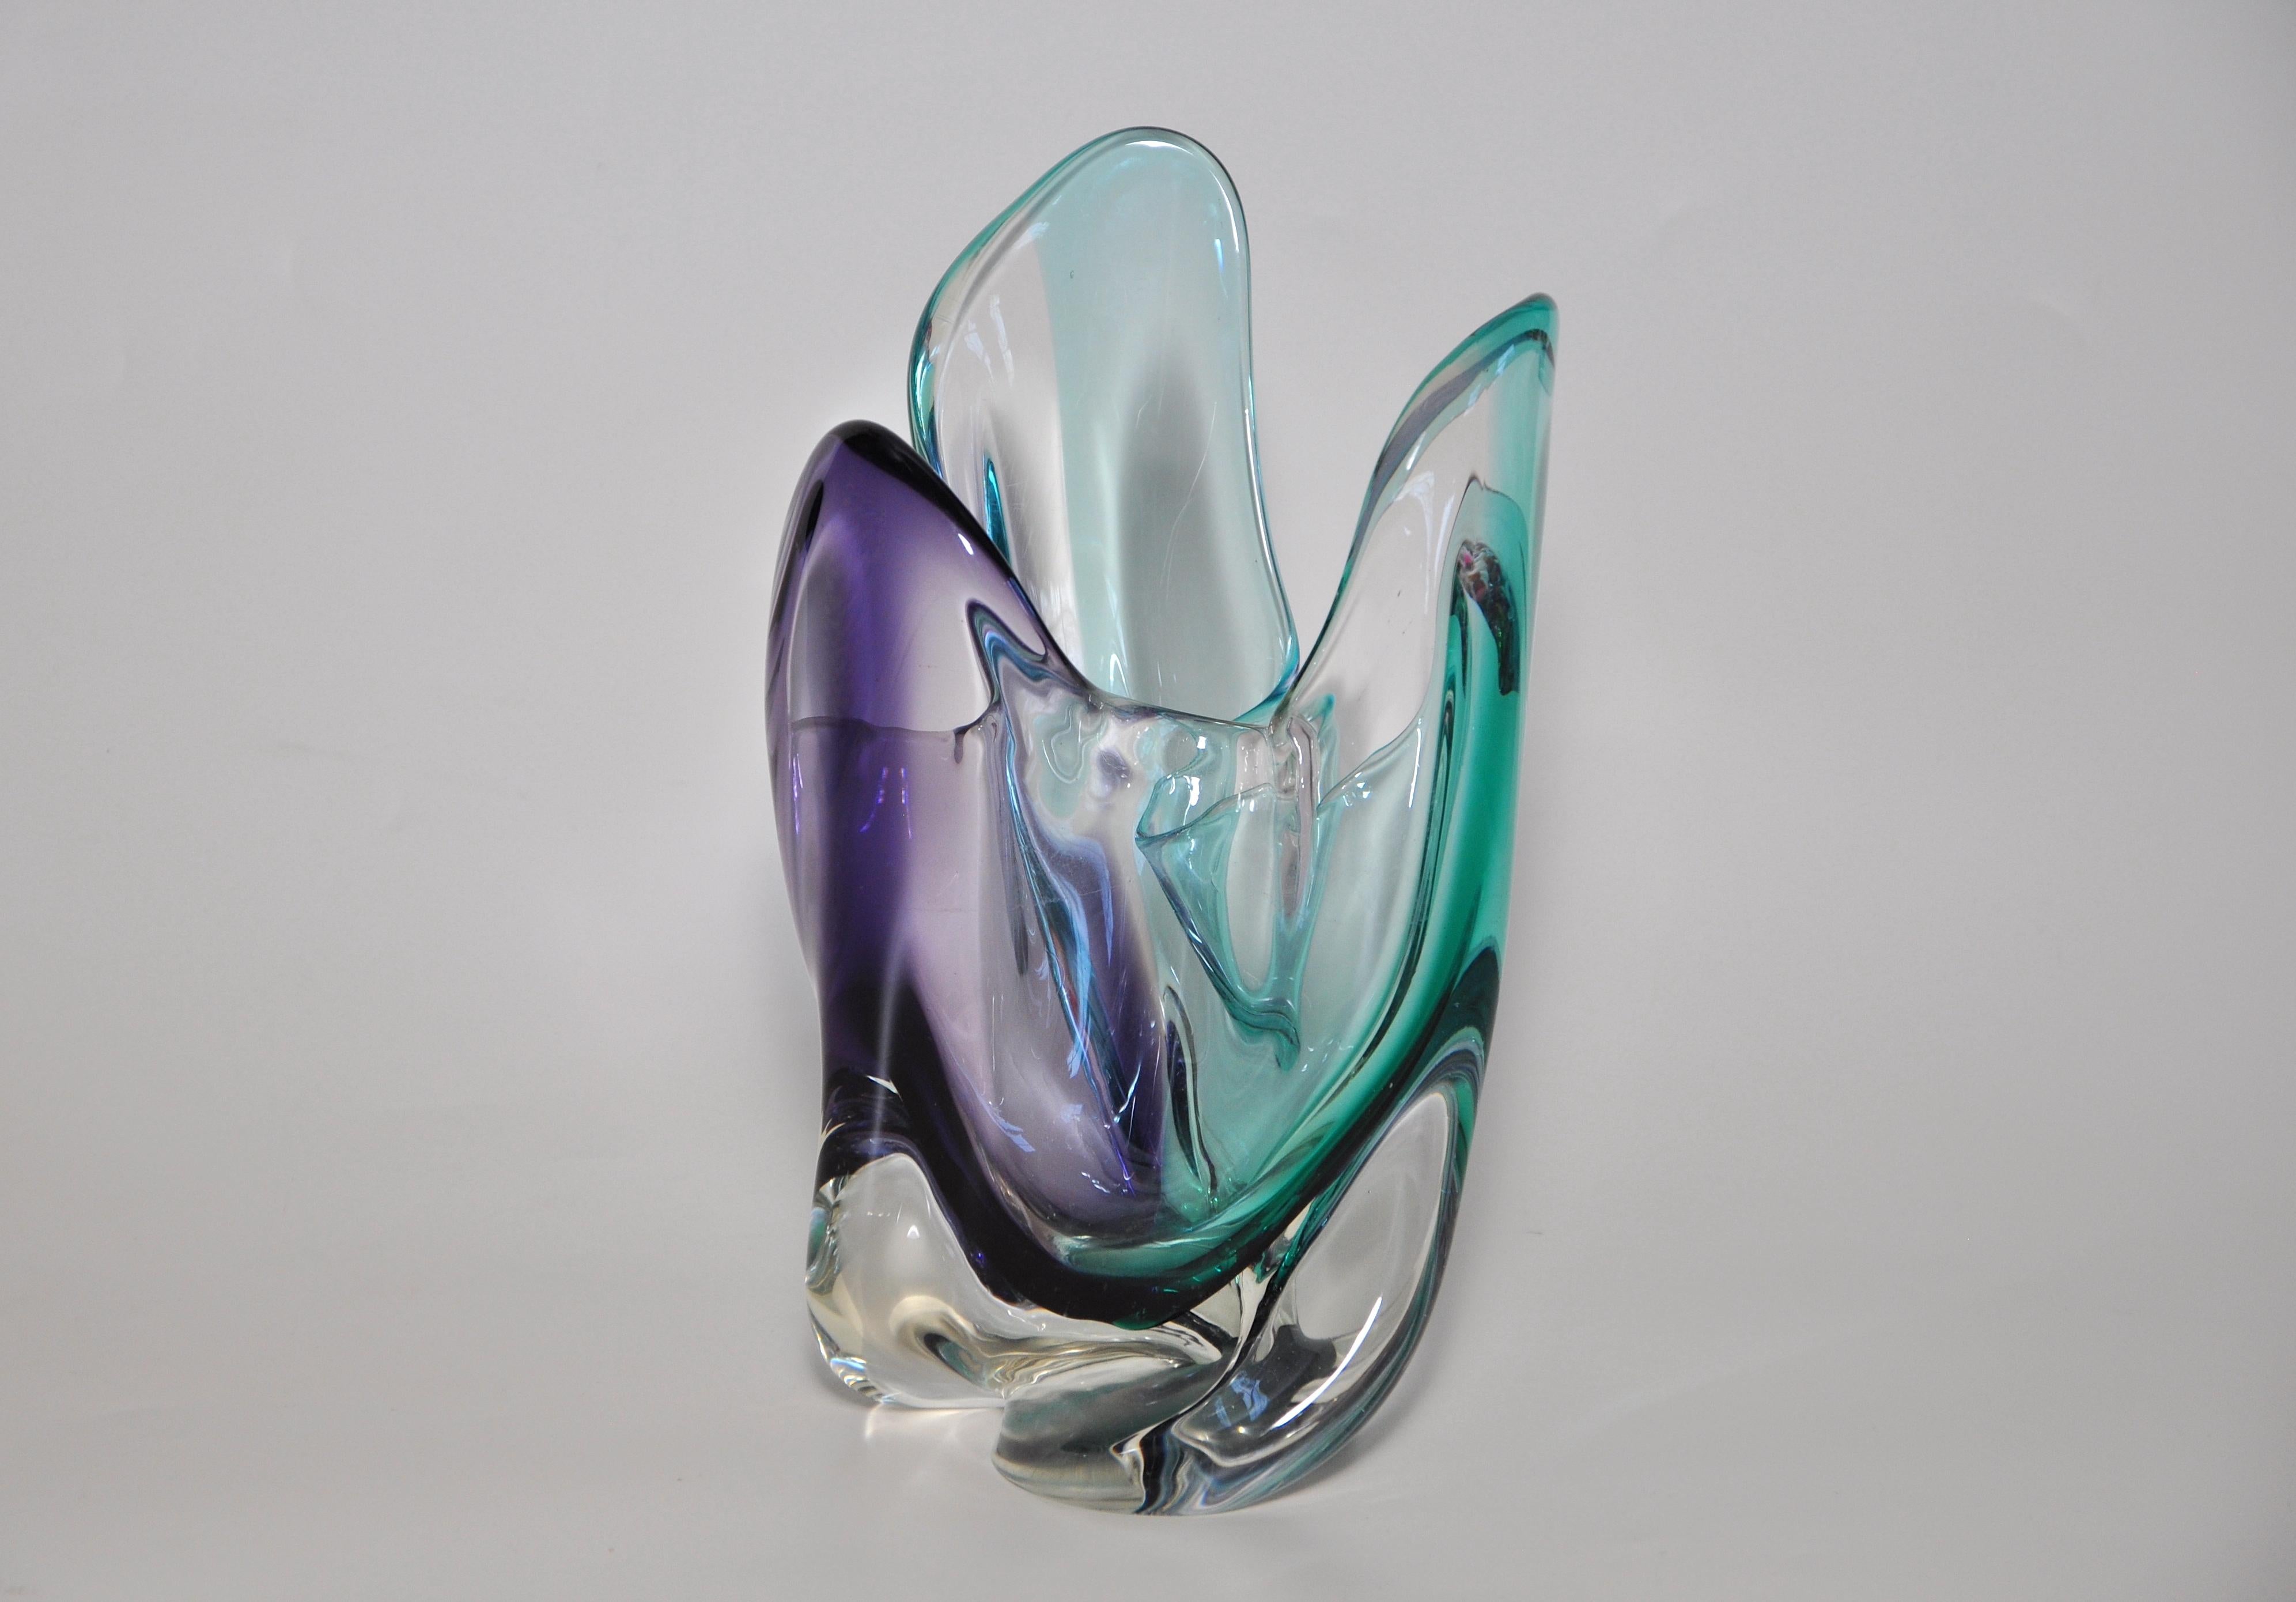 Title:
Stunning Vintage Purple Turquoise Green Blue Art Glass Bowl Vase 

Description:
A stunning vintage piece of art glass in a striking purple and turquoise blue green. The sides are molten and fluid looking like waves or even petals. This